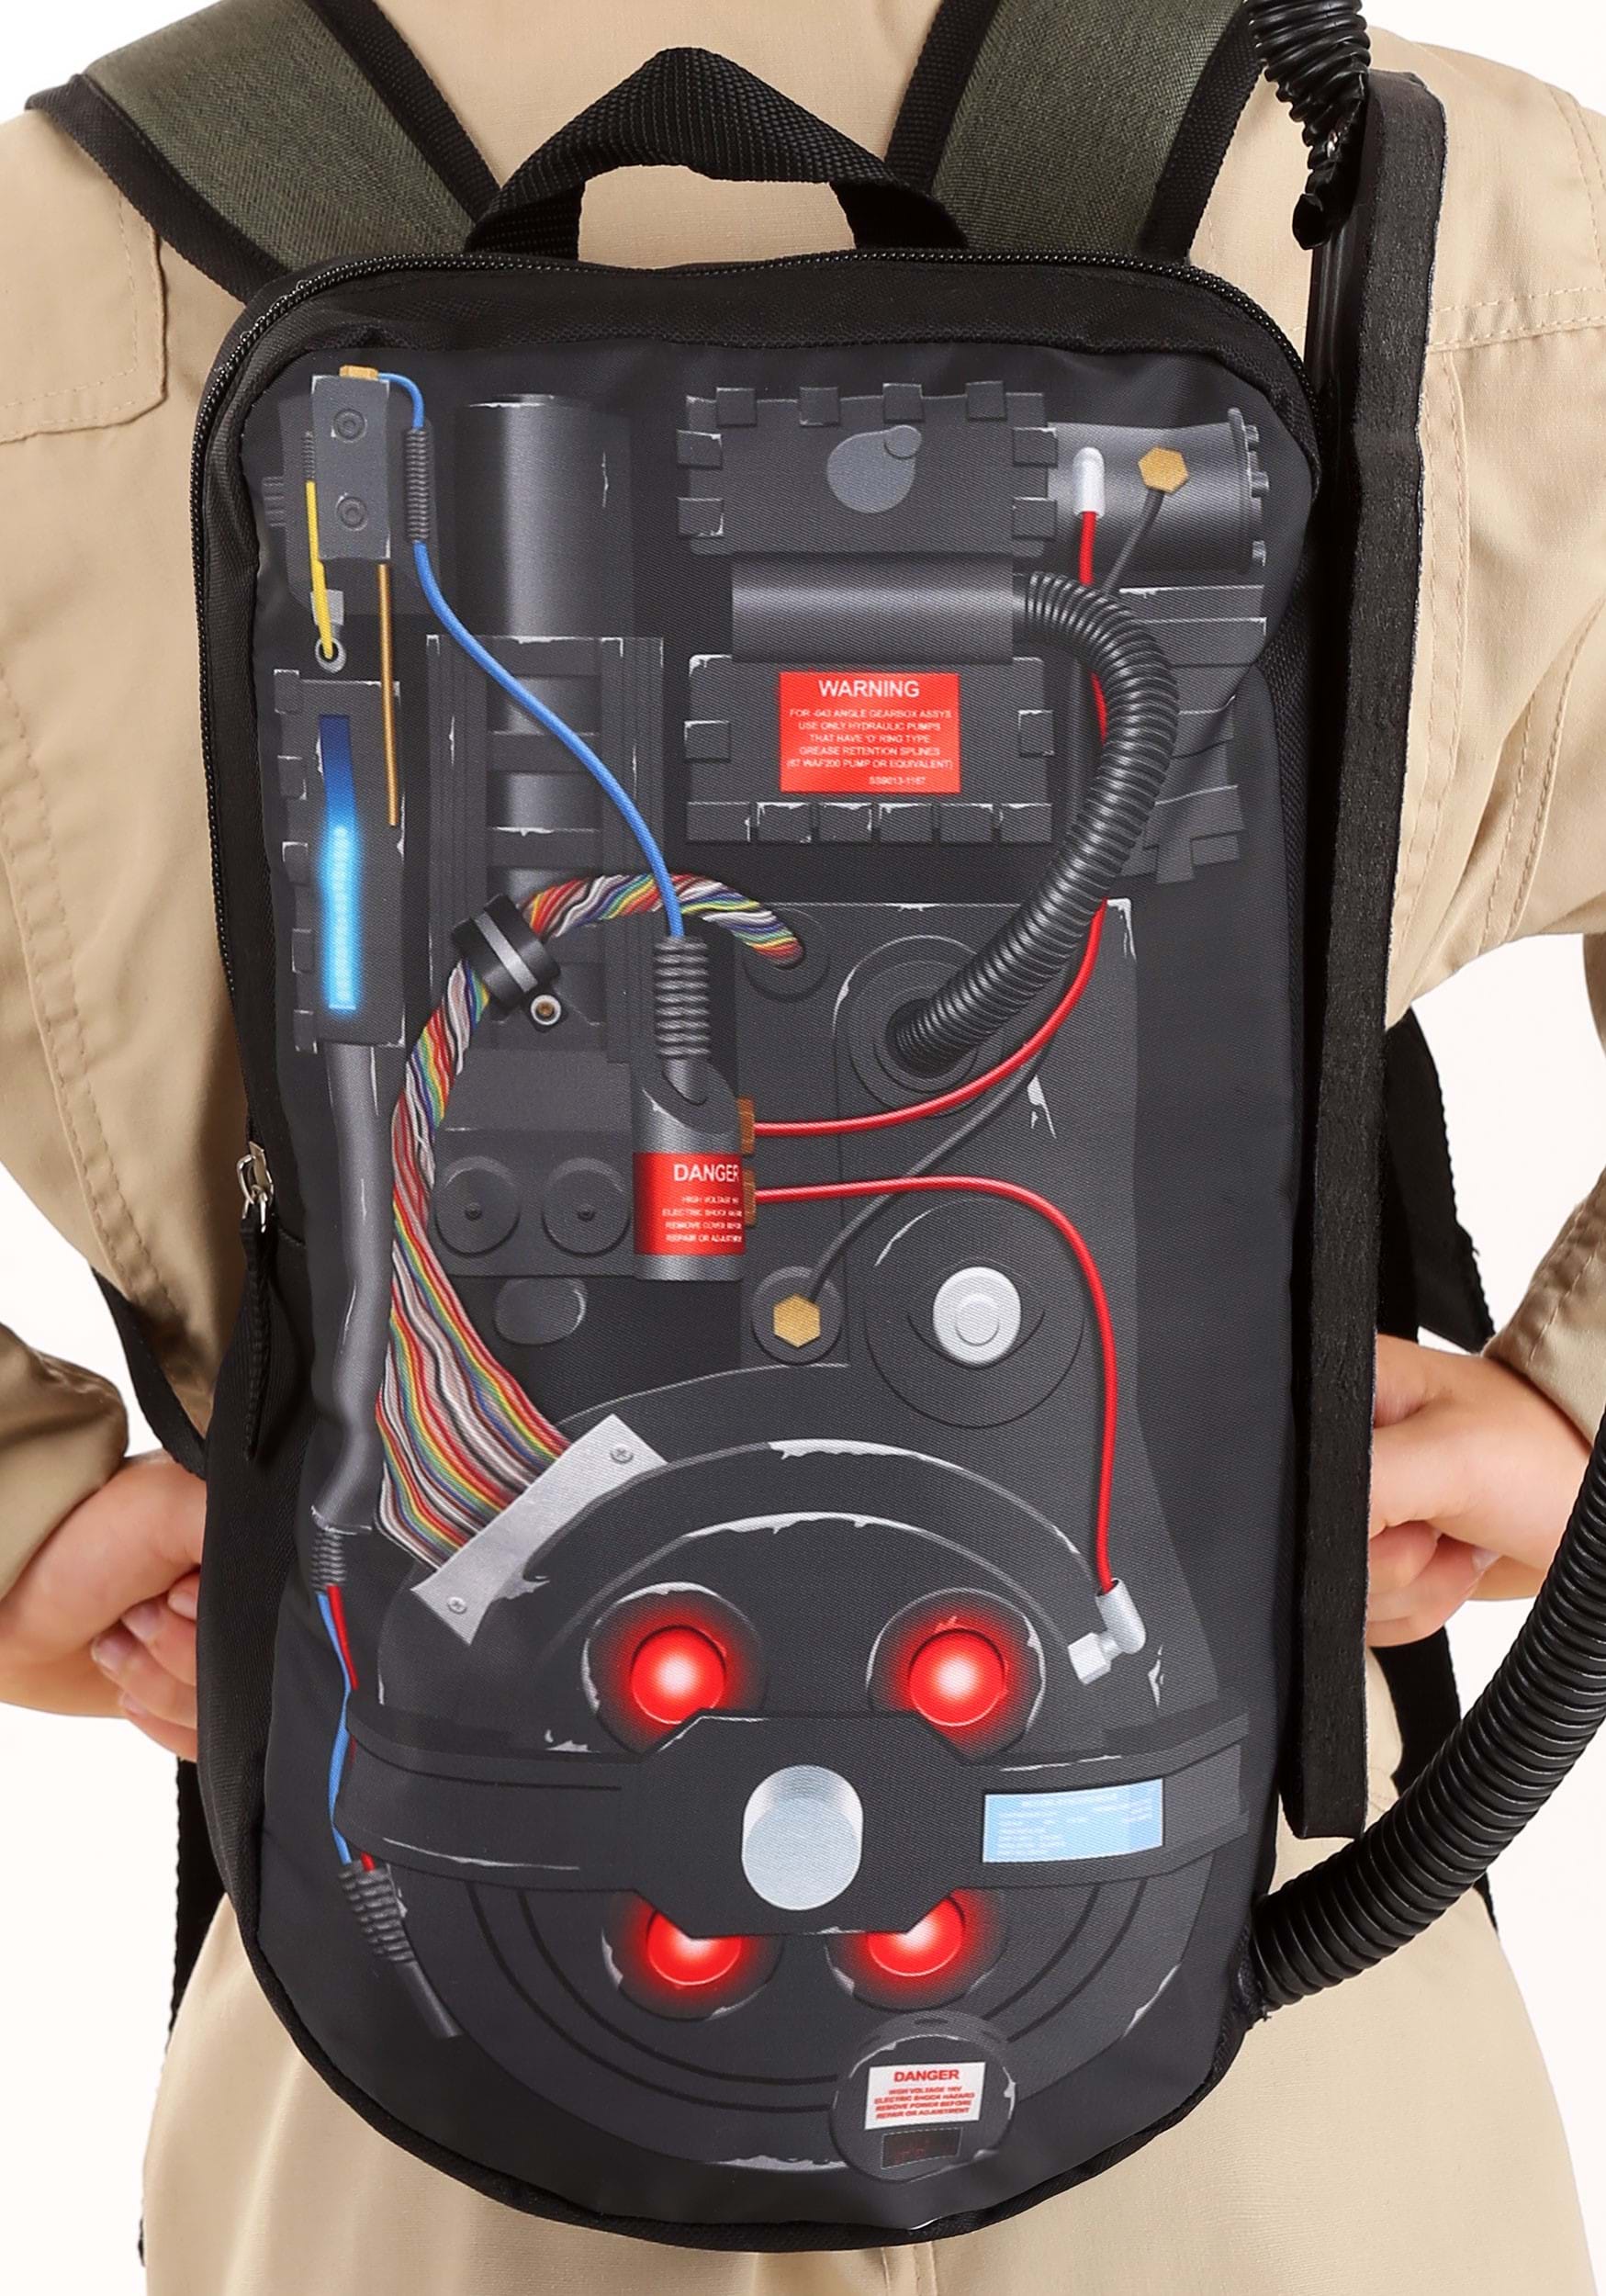 Toddler Ghostbuster Proton Pack